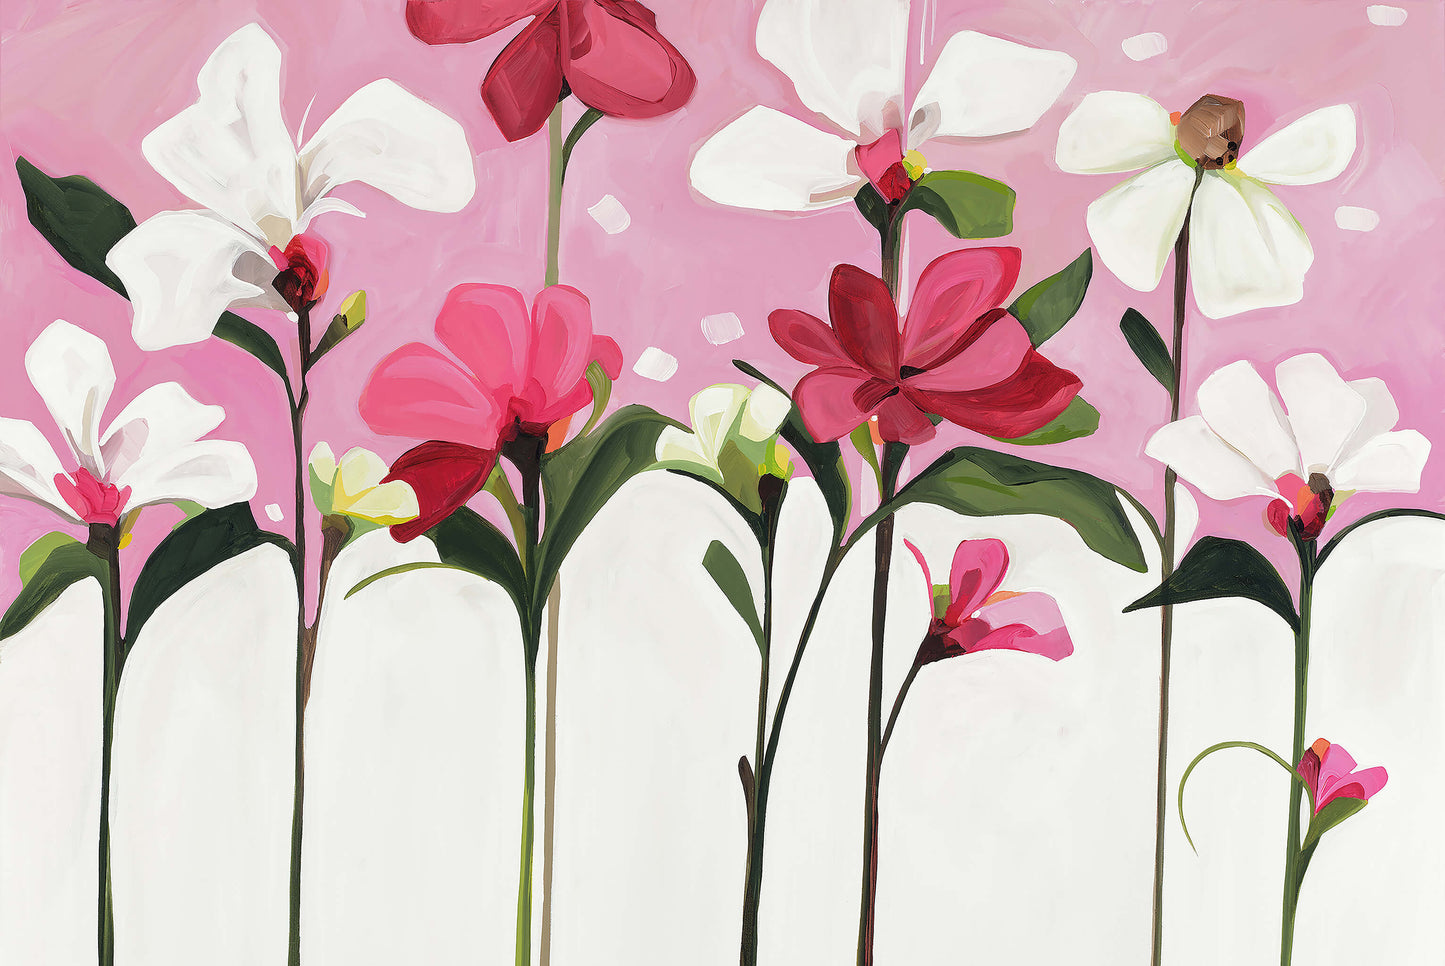 magenta pink and white flowers featured in an art print created from an acrylic flower painting